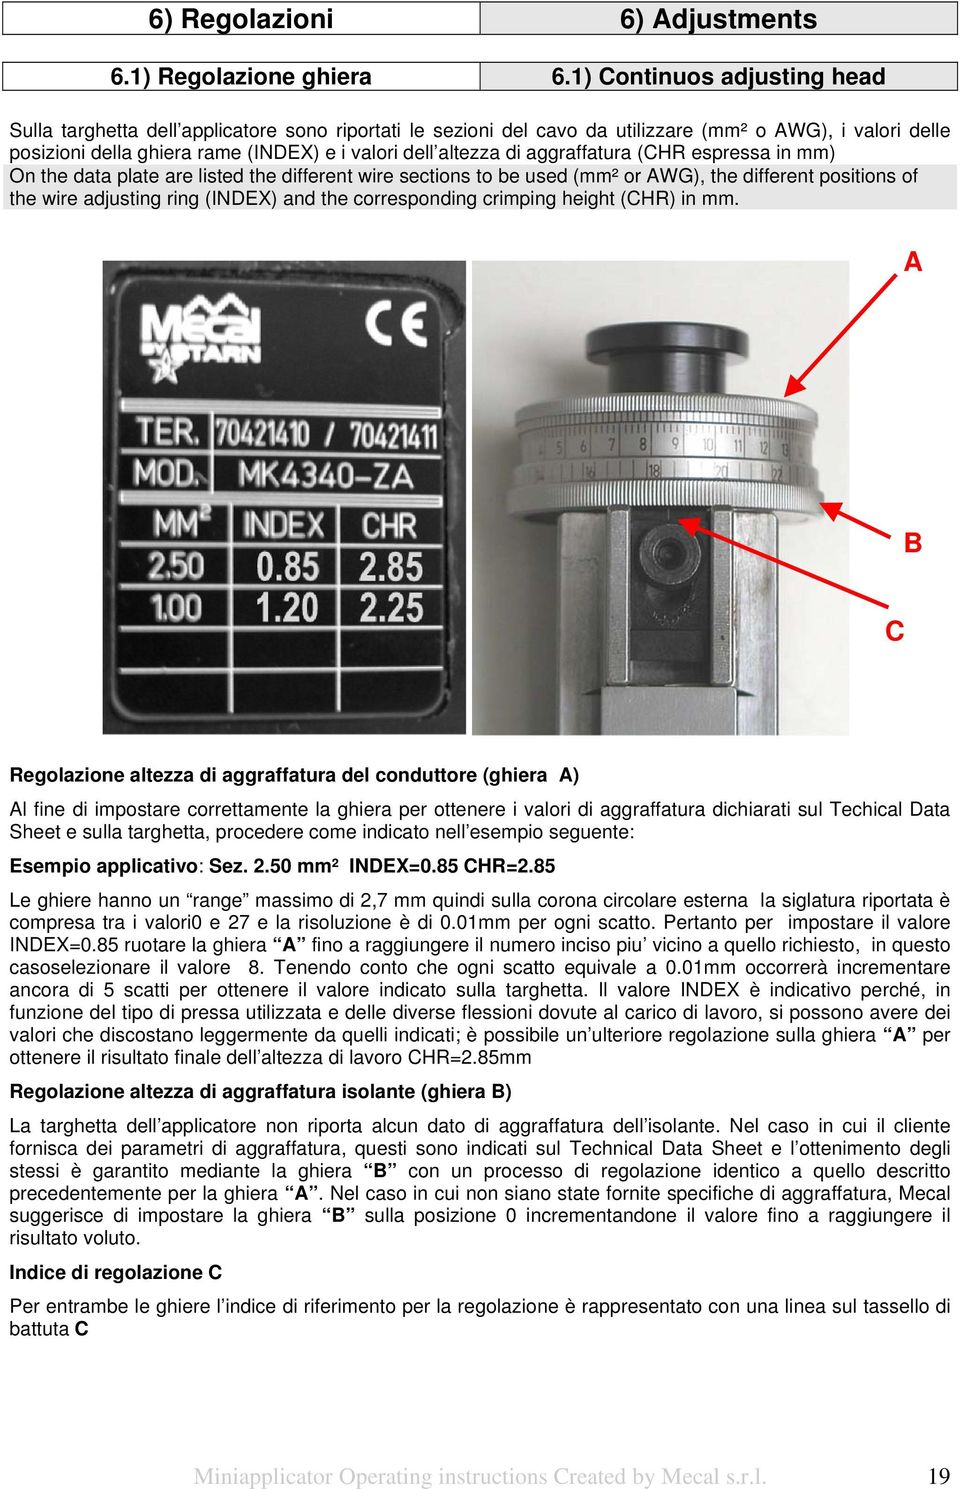 di aggraffatura (CHR espressa in mm) On the data plate are listed the different wire sections to be used (mm² or AWG), the different positions of the wire adjusting ring (INDEX) and the corresponding